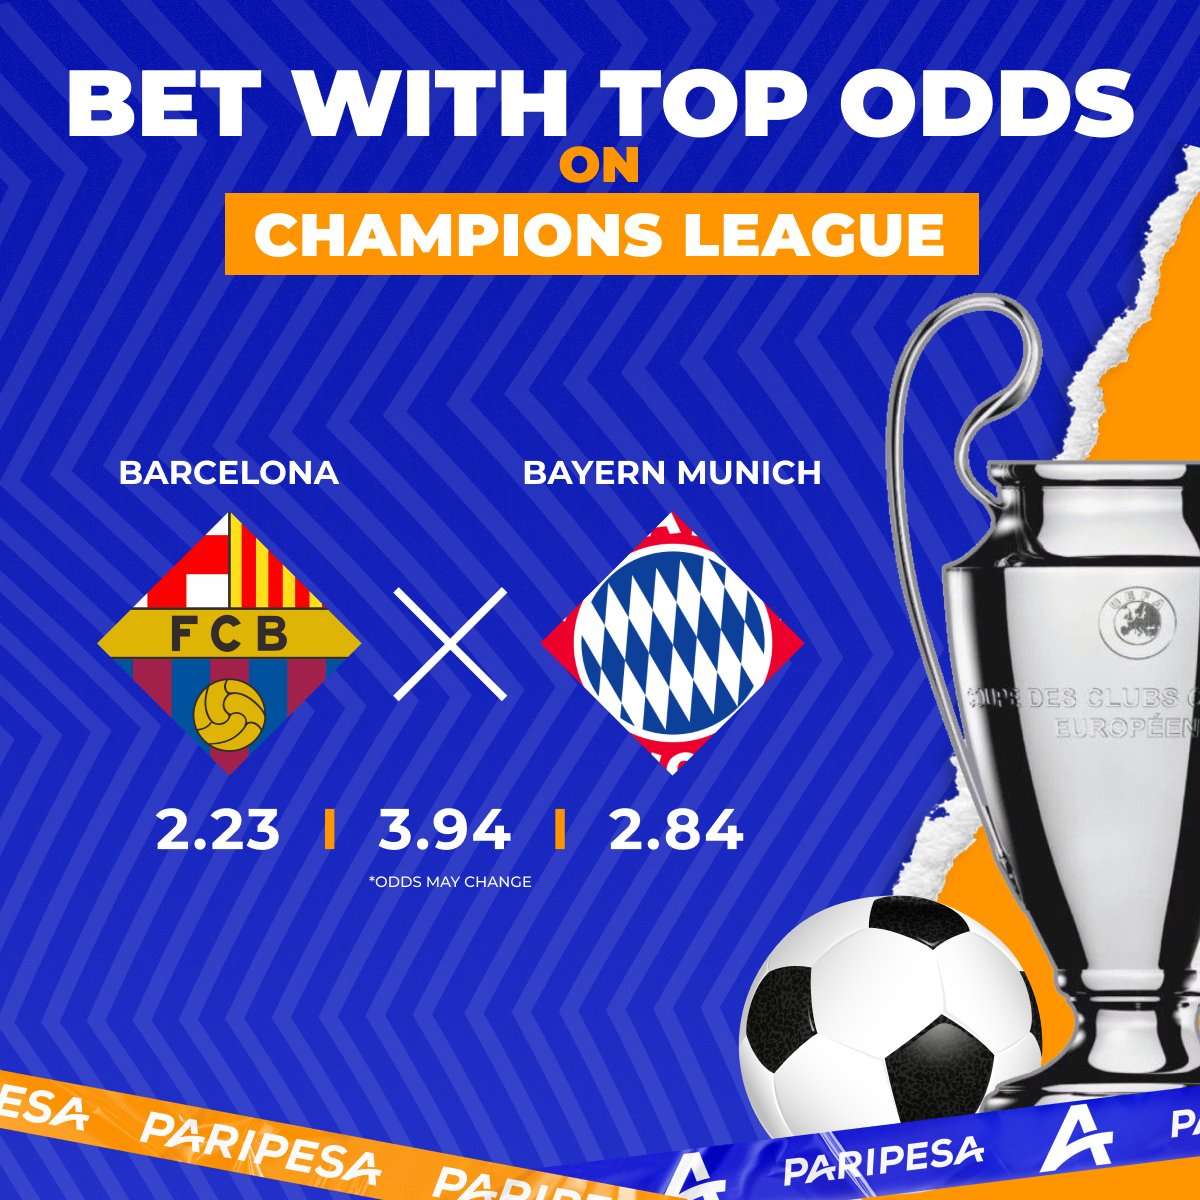 👊🥁 Barca is unlikely to reach the playoffs, but to avenge the pain of previous meetings is a matter of honor for the Catalans! 😁 Well, Bayern are ready to beat Barca even at Camp Nou. ☝ Only one can win today. Predict it here: m.paripesa.bet/72b3 #ChampionsLeague